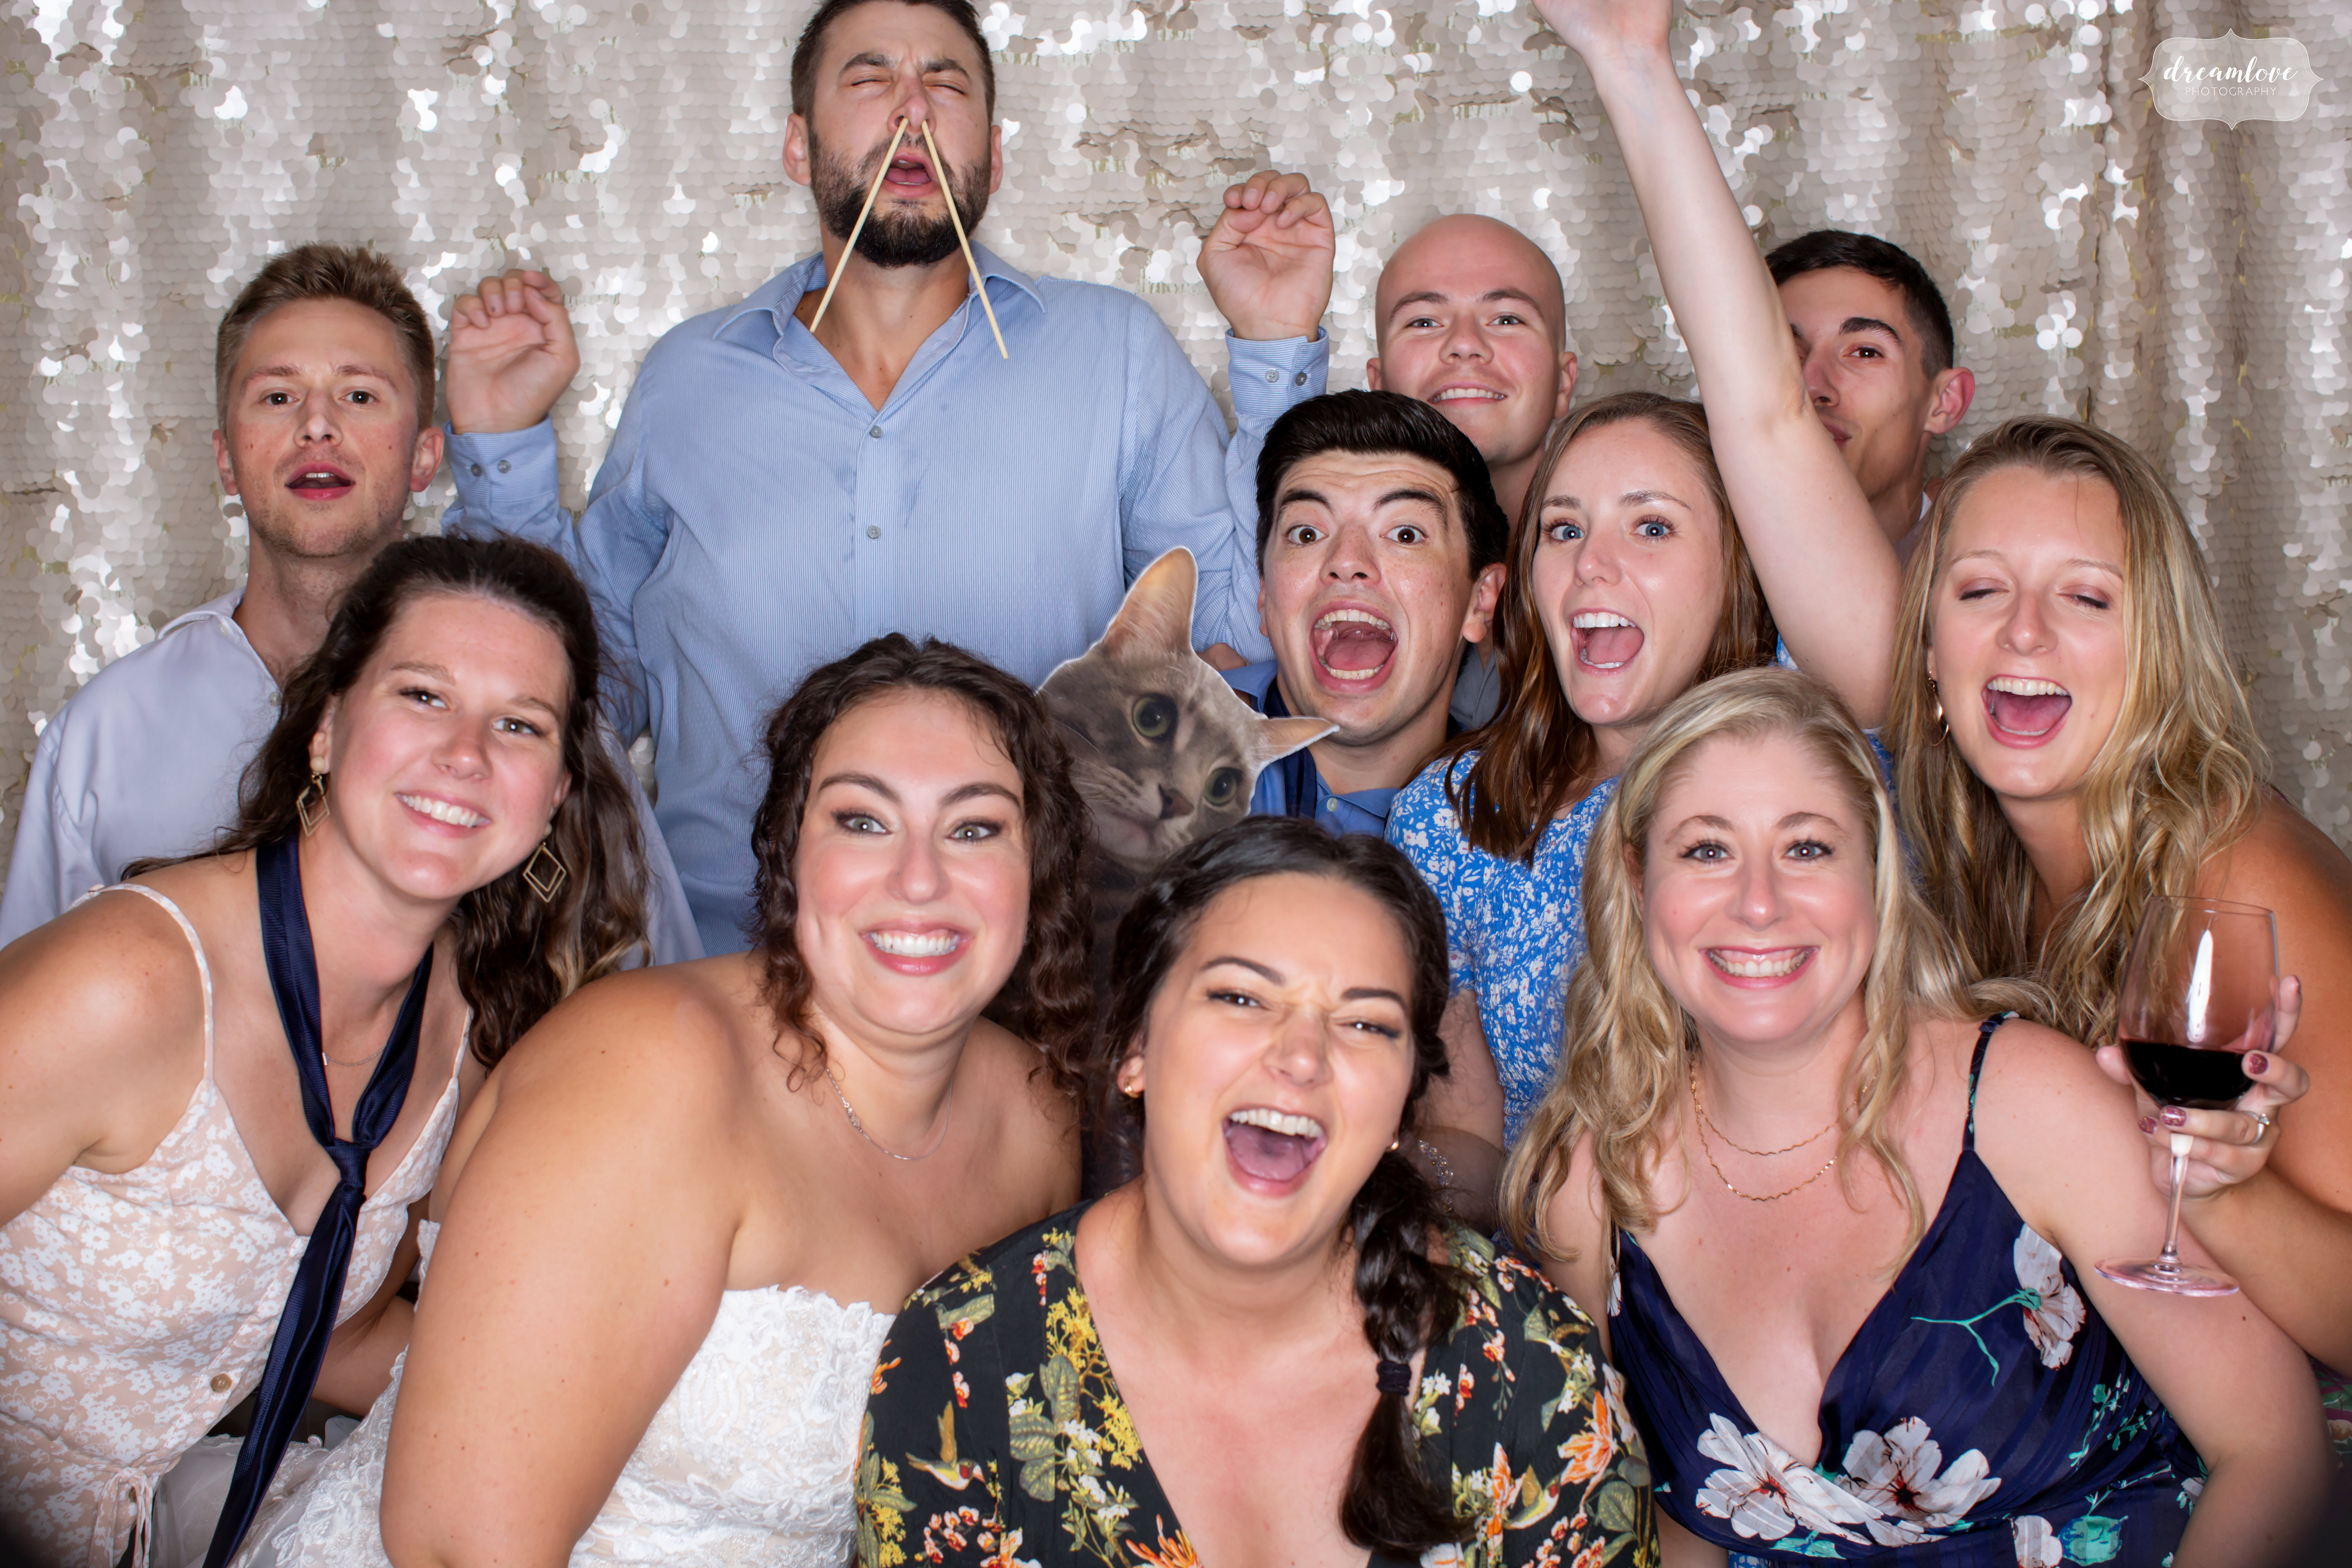 Wedding guests having fun in a photo booth at Moraine Farm in MA.